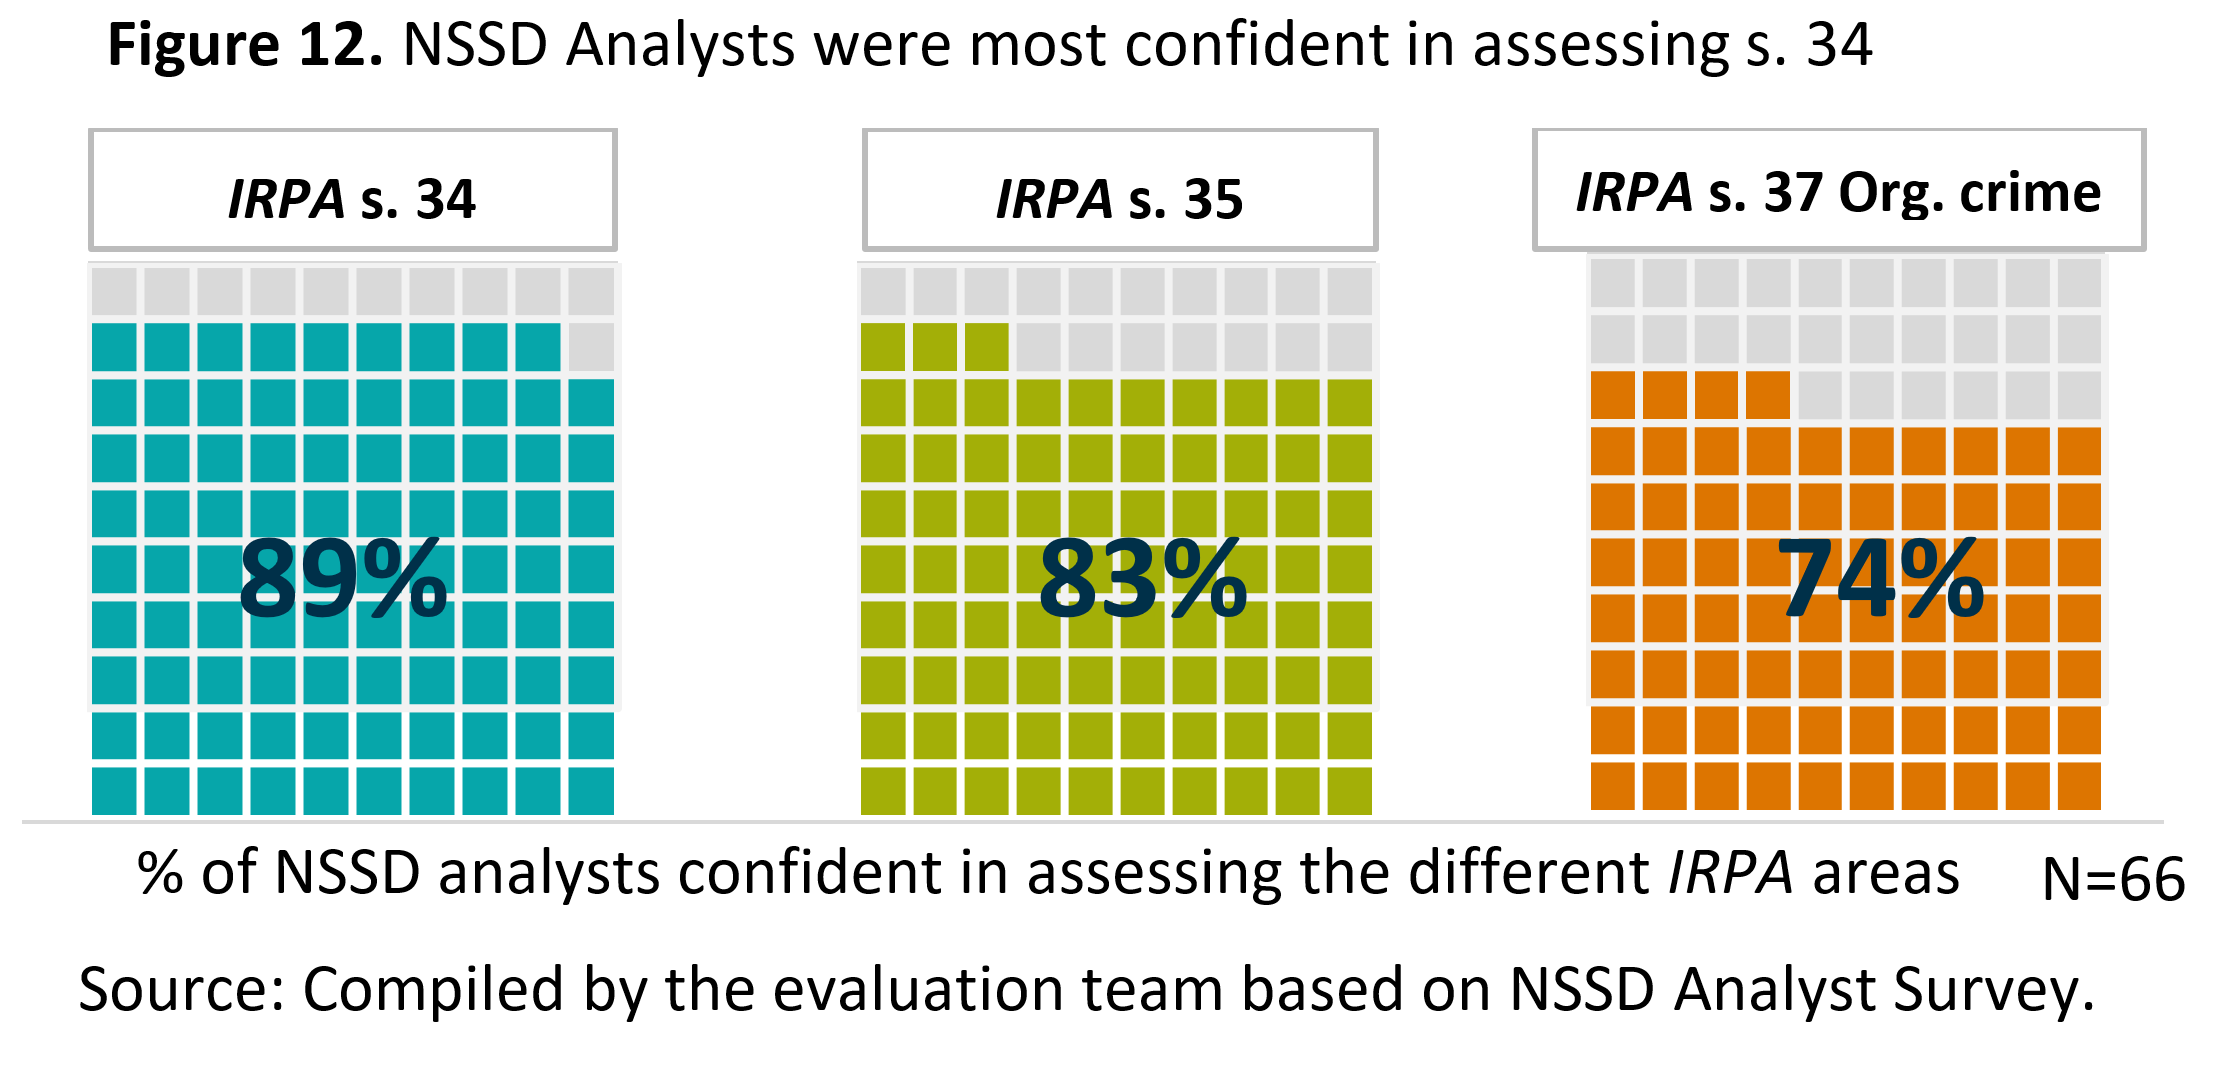 Figure 12 shows the percentage of <abbr>NSSD</abbr> analysts confident in assessing against different sections of <abbr>IRPA</abbr>.